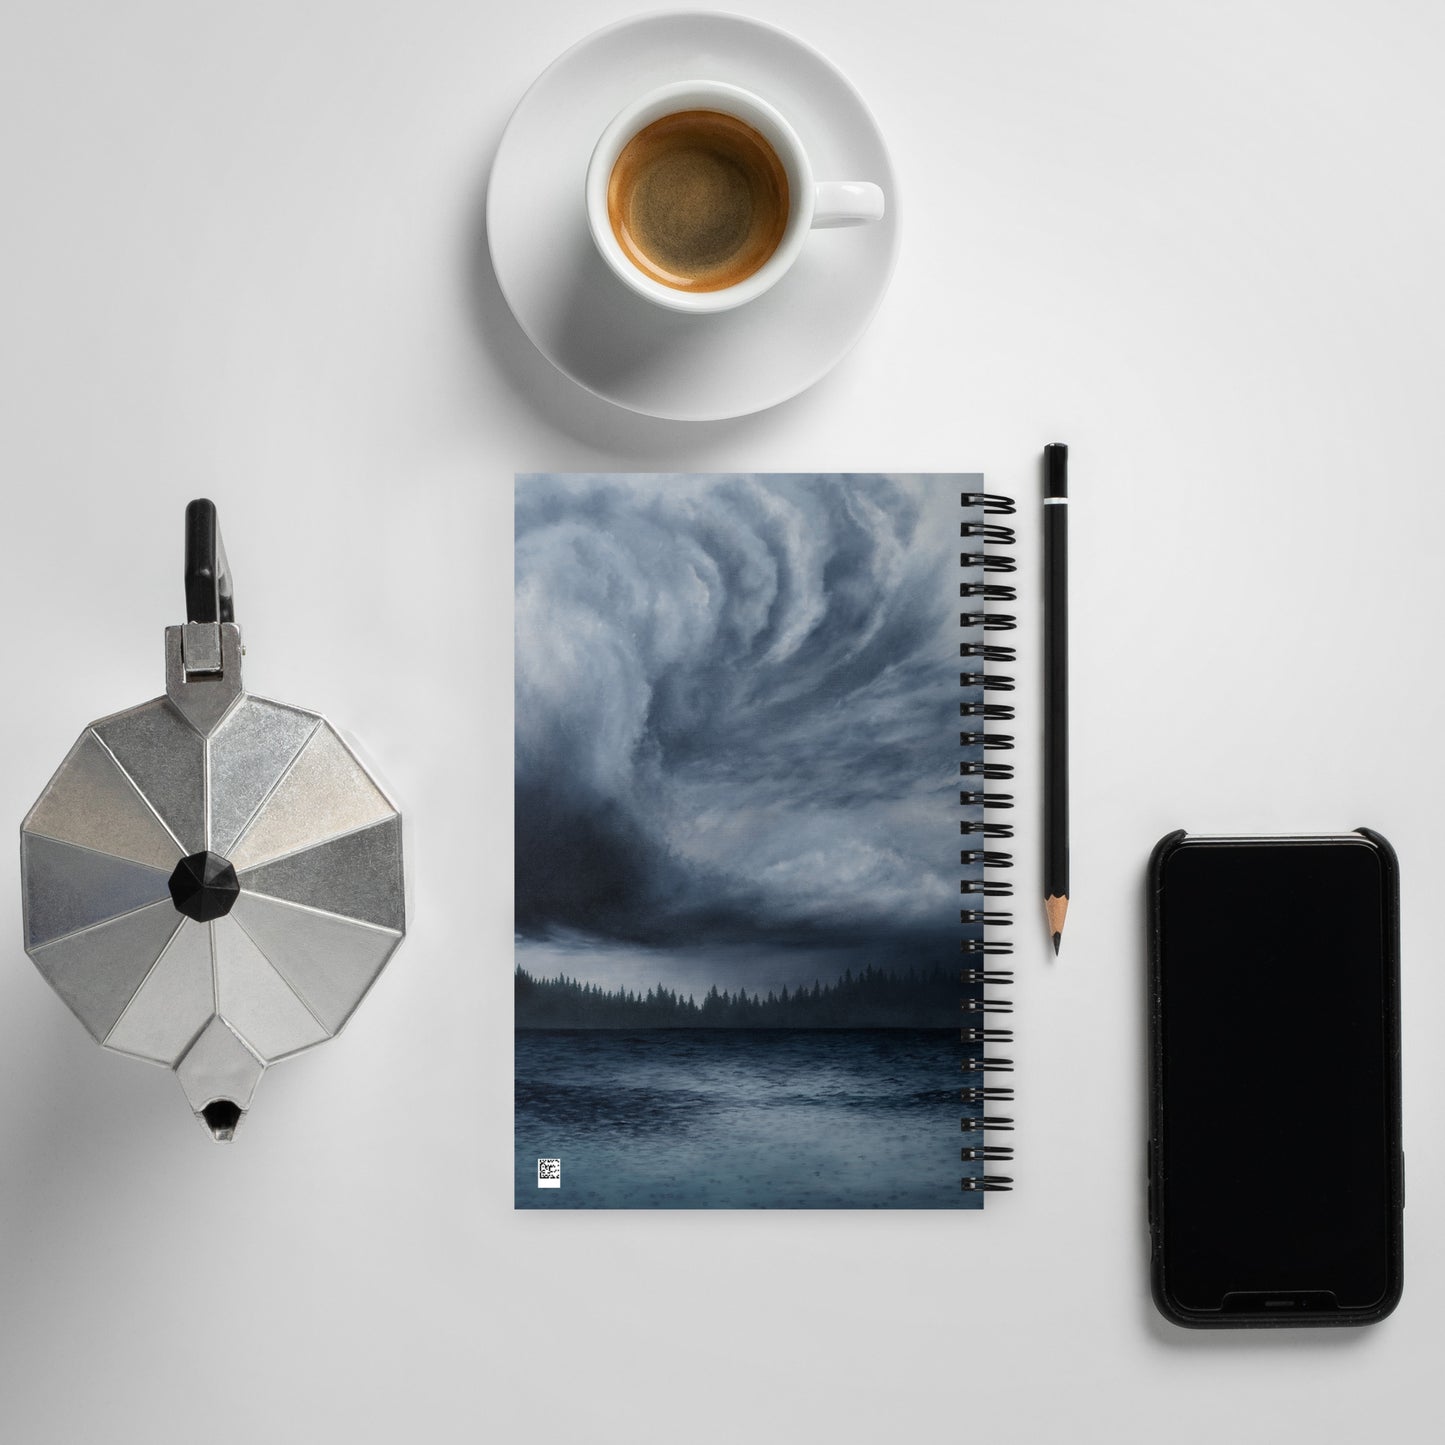 The Arrival Spiral notebook